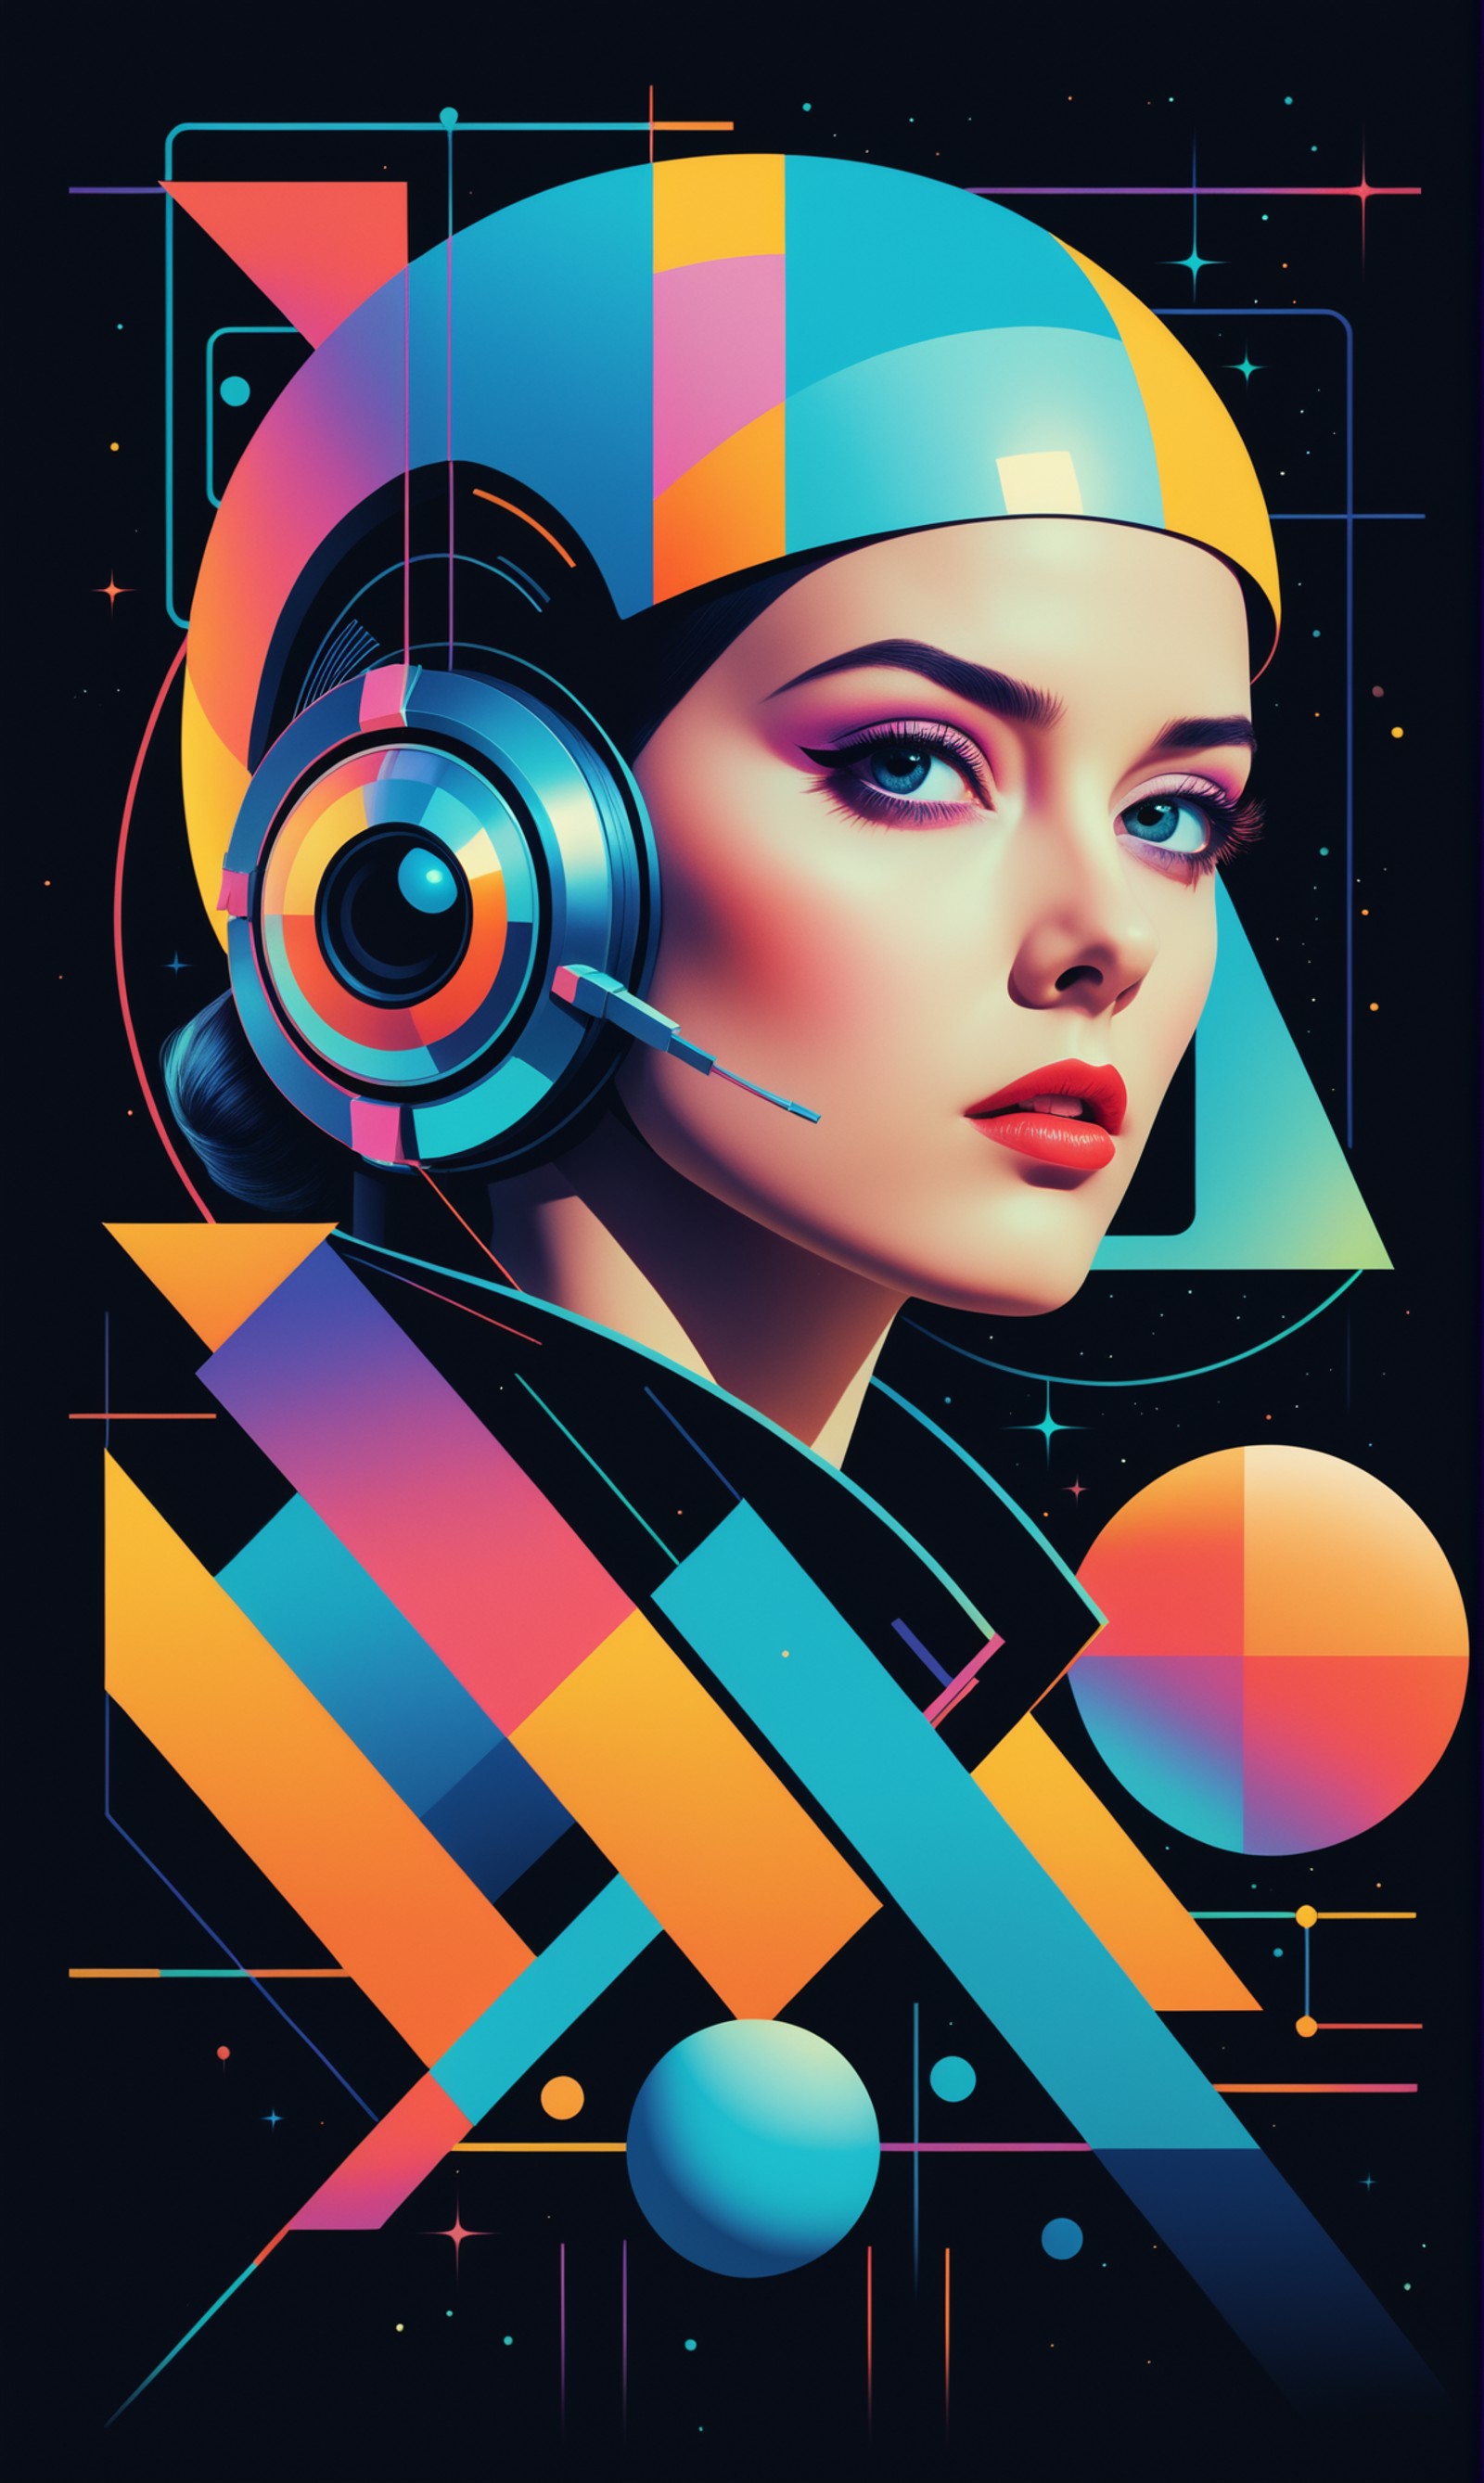 women, flat shading, bizarre technology, faded colors, faded bright colors, cyber-inspired typography, futuristic imagery,...